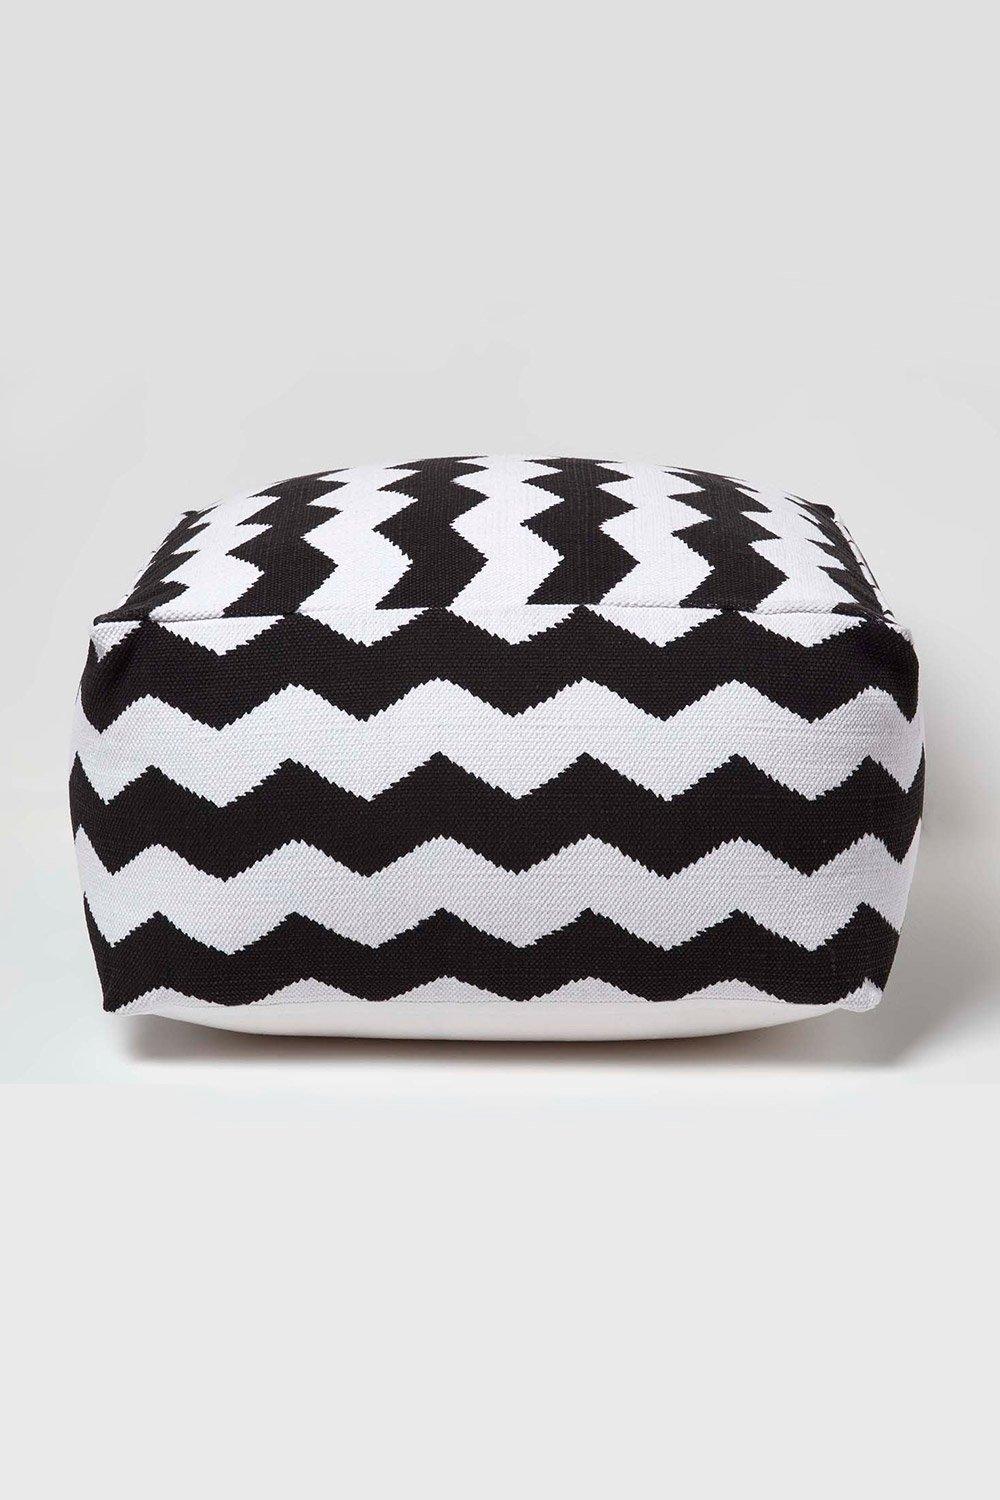 Large Bean Filled Cube Footstool